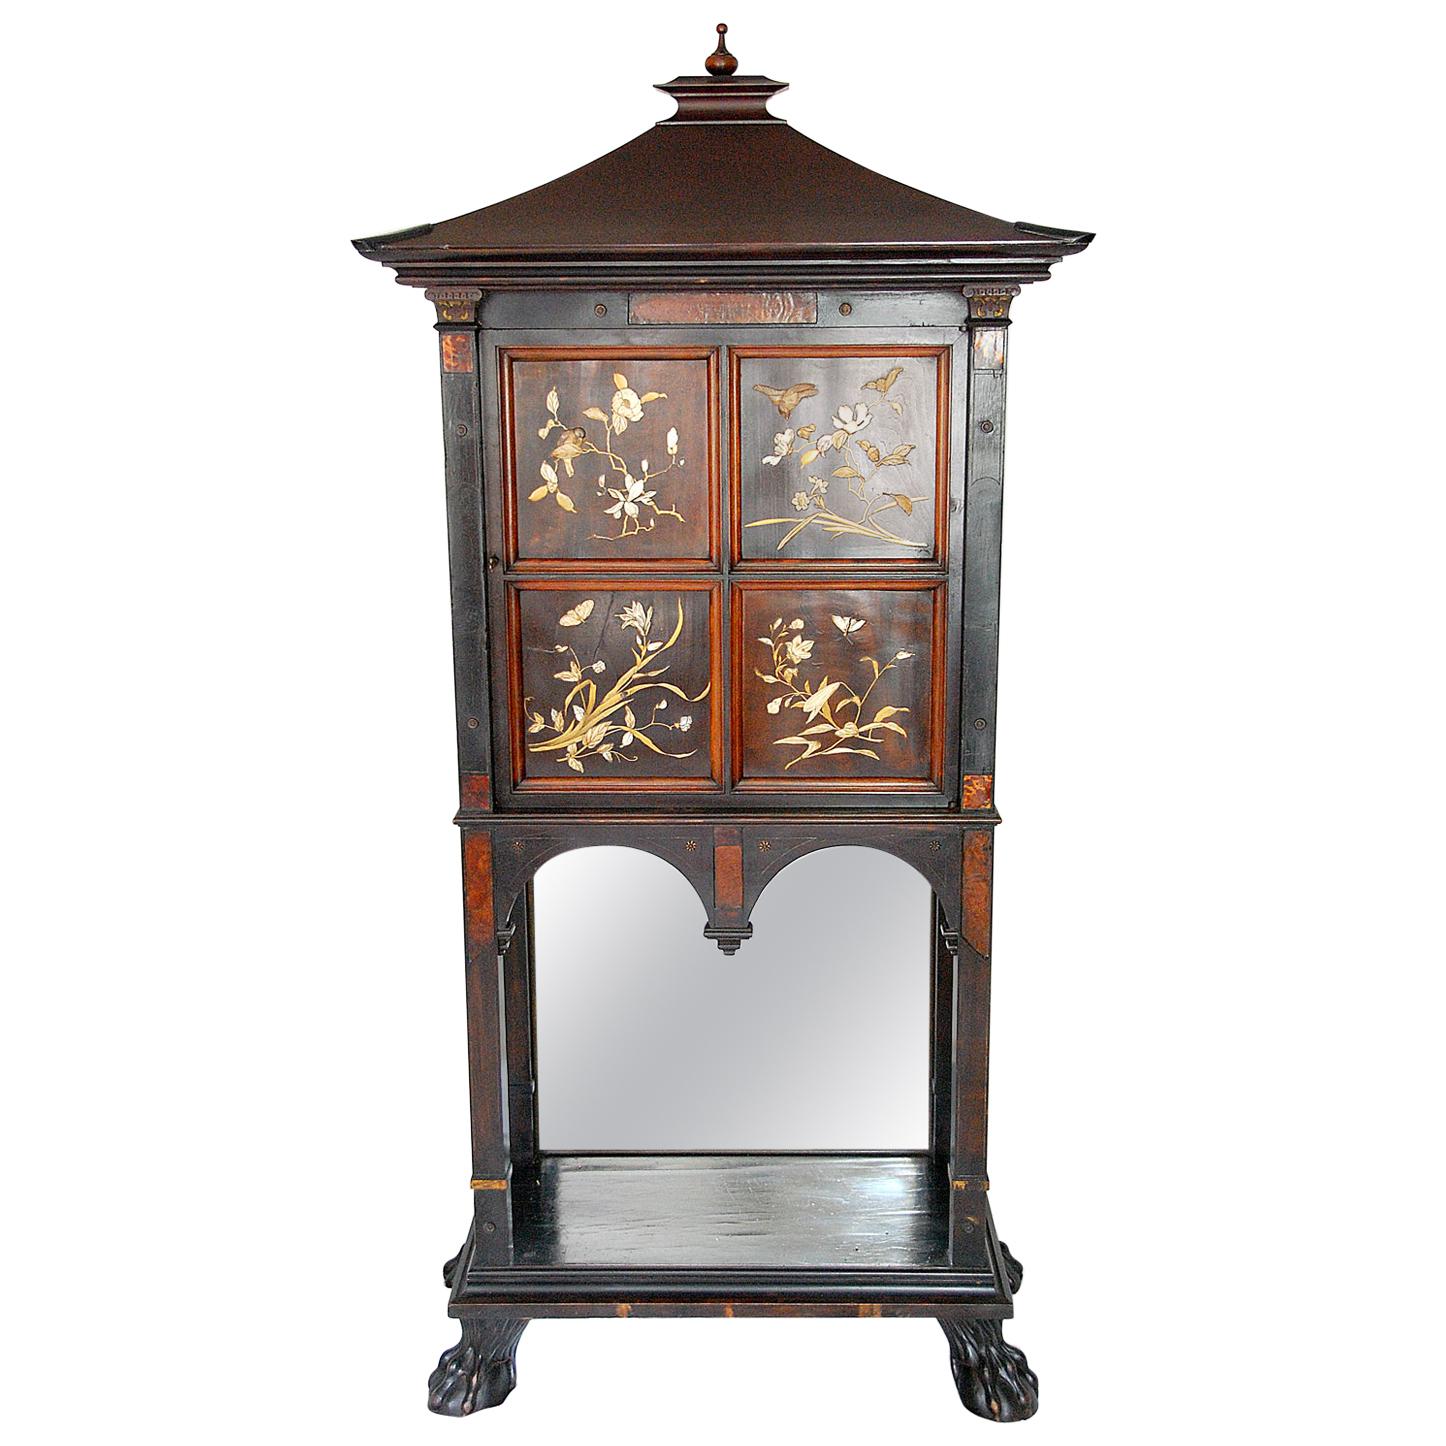 French Art Nouveau Ebonized Cabinet with Inlaid and Overlaid Naturalistic Panels